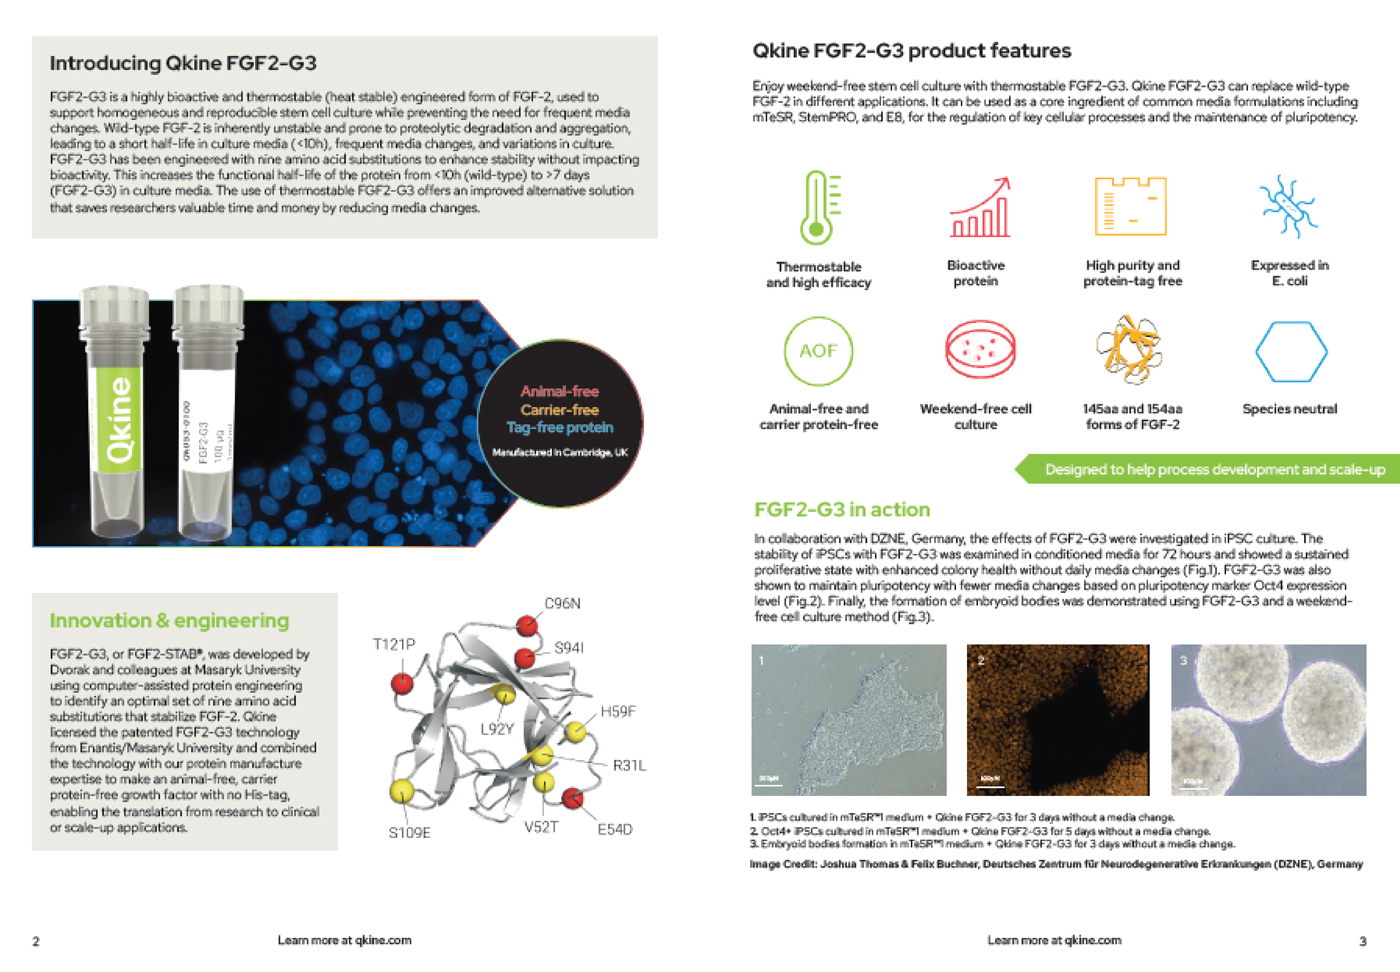 fgf2-g3 product brochure